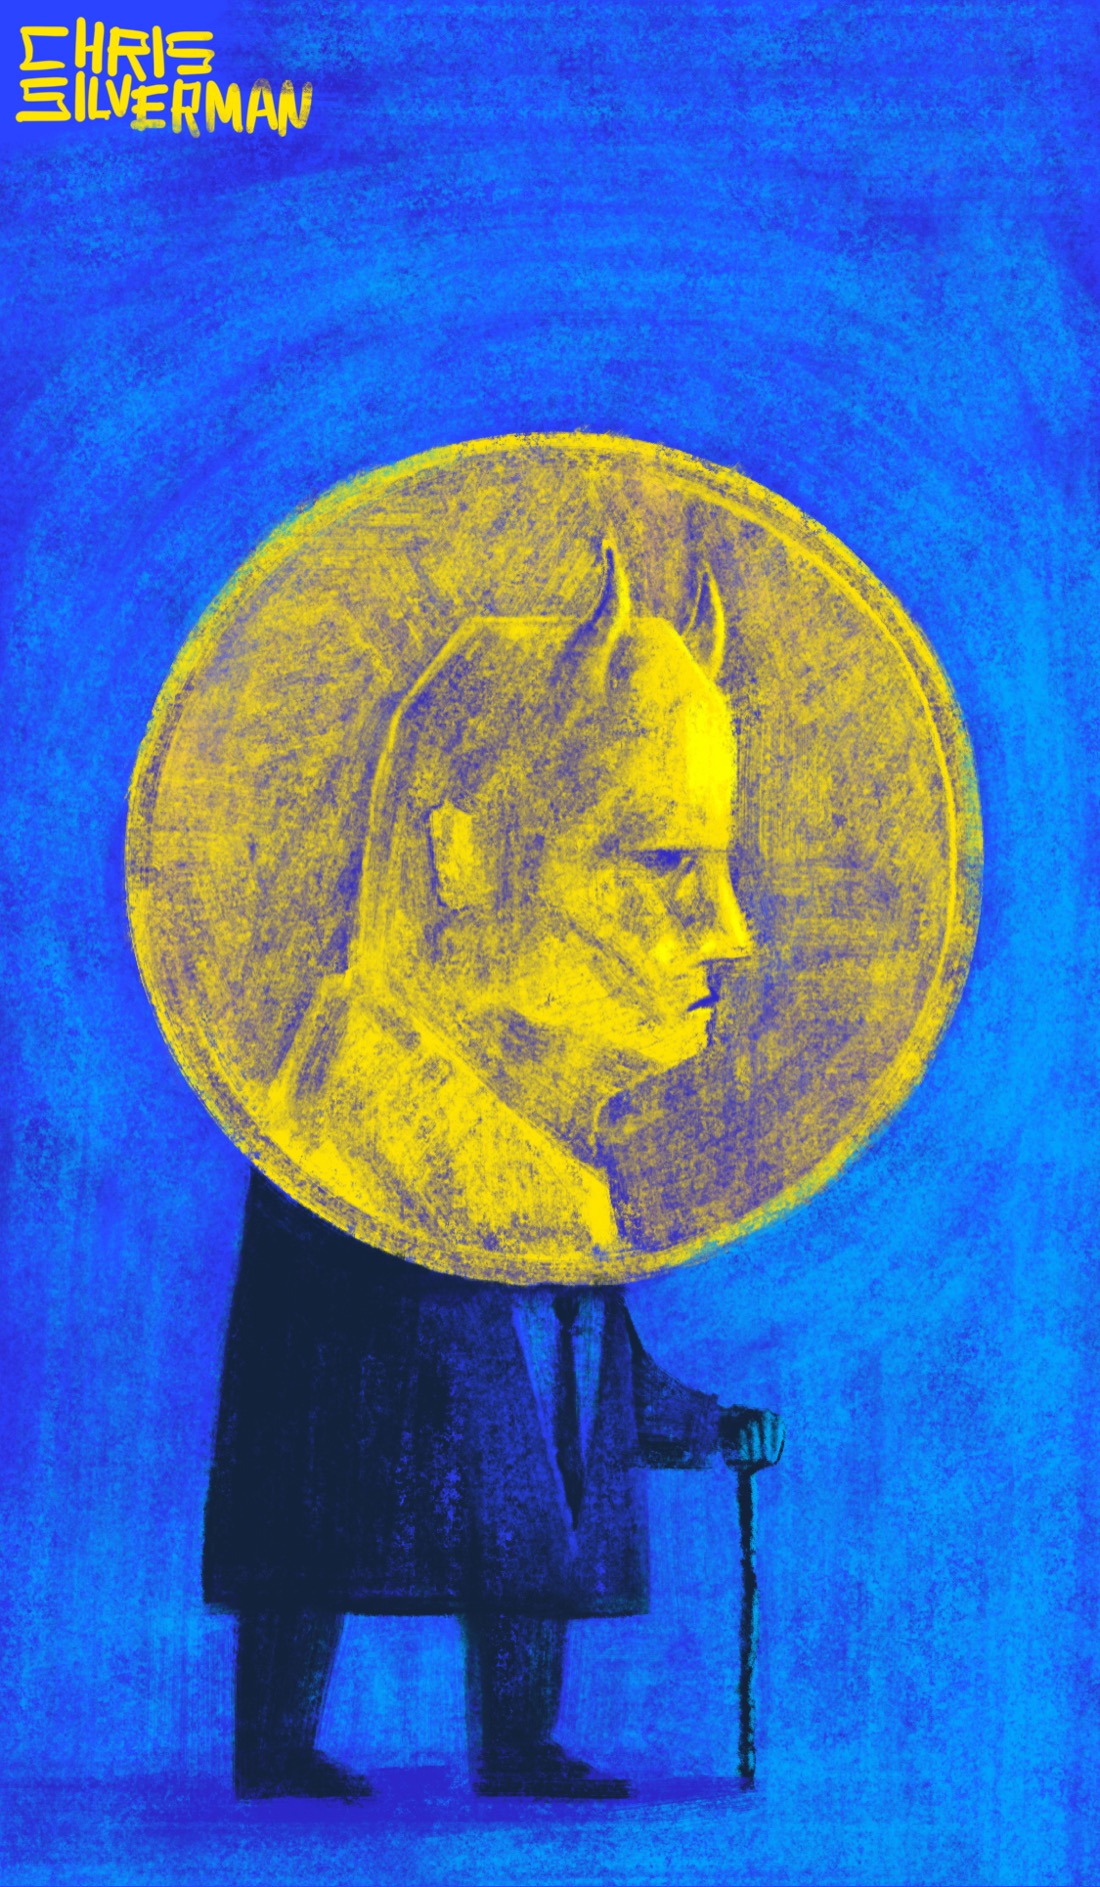 A large gold coin with a face in profile on it. The face is, like that on most currency, a bald man with a hard, vacant stare. Unlike most currency figureheads, this one has devil horns. The coin serves as a head for a figure wearing a dark suit. The figure stands on a blue background.